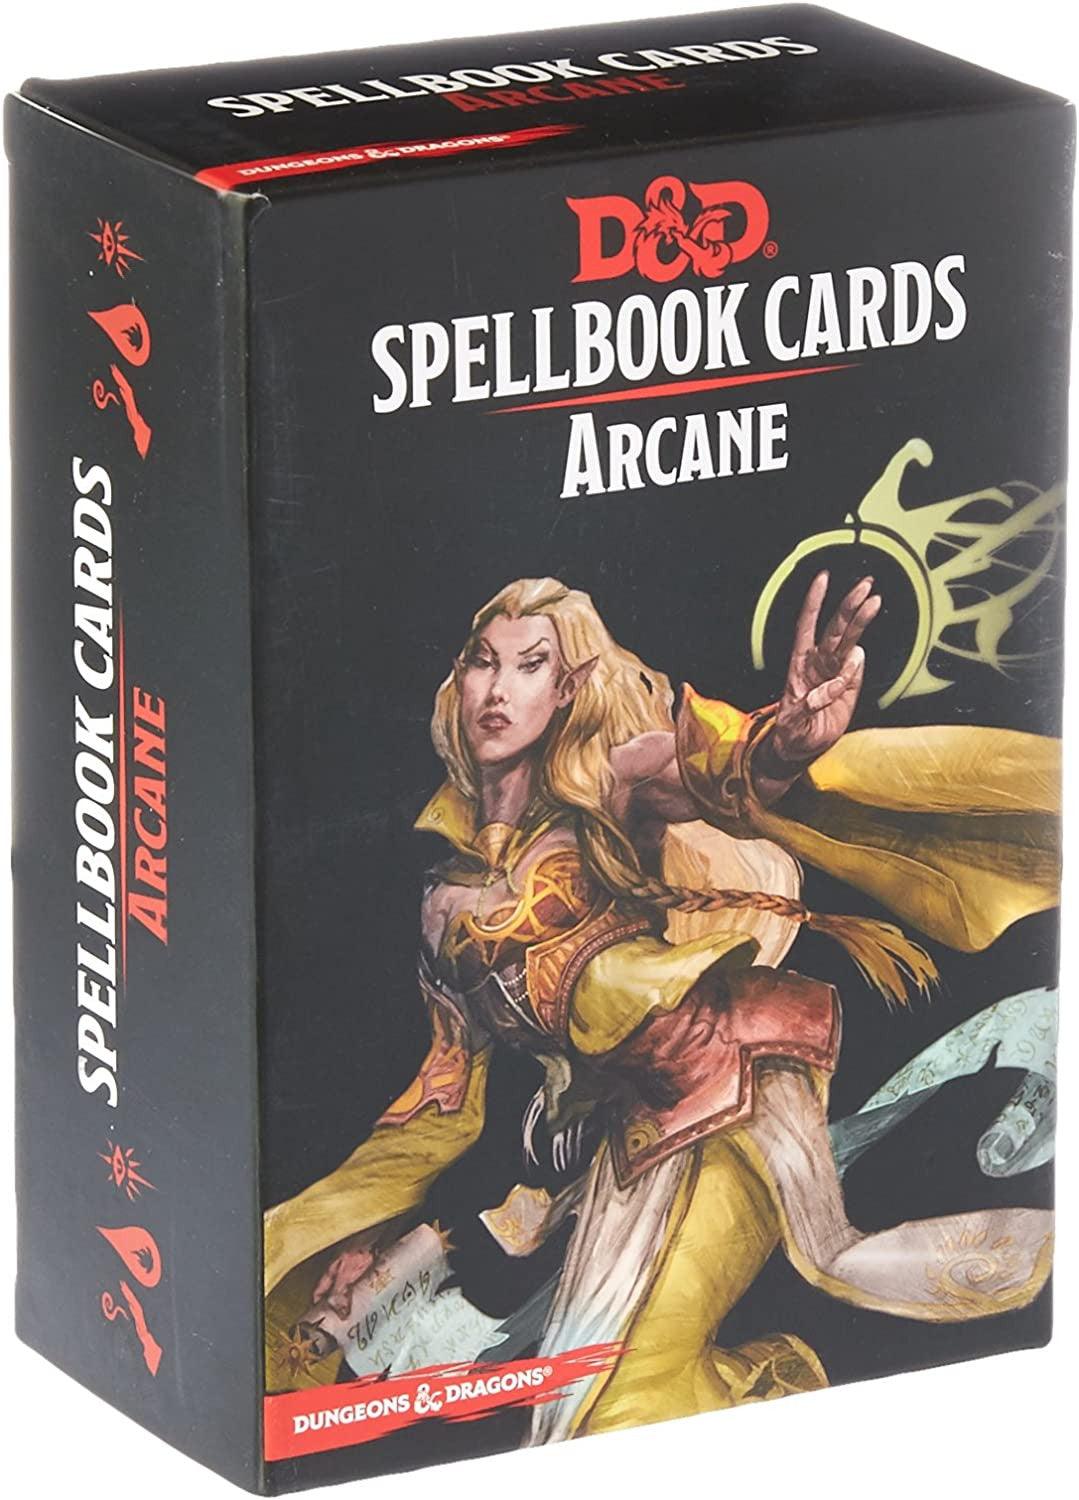 VR-101238 D&D Dungeons & Dragons Spellbook Cards Arcane - Wizards of the Coast - Titan Pop Culture